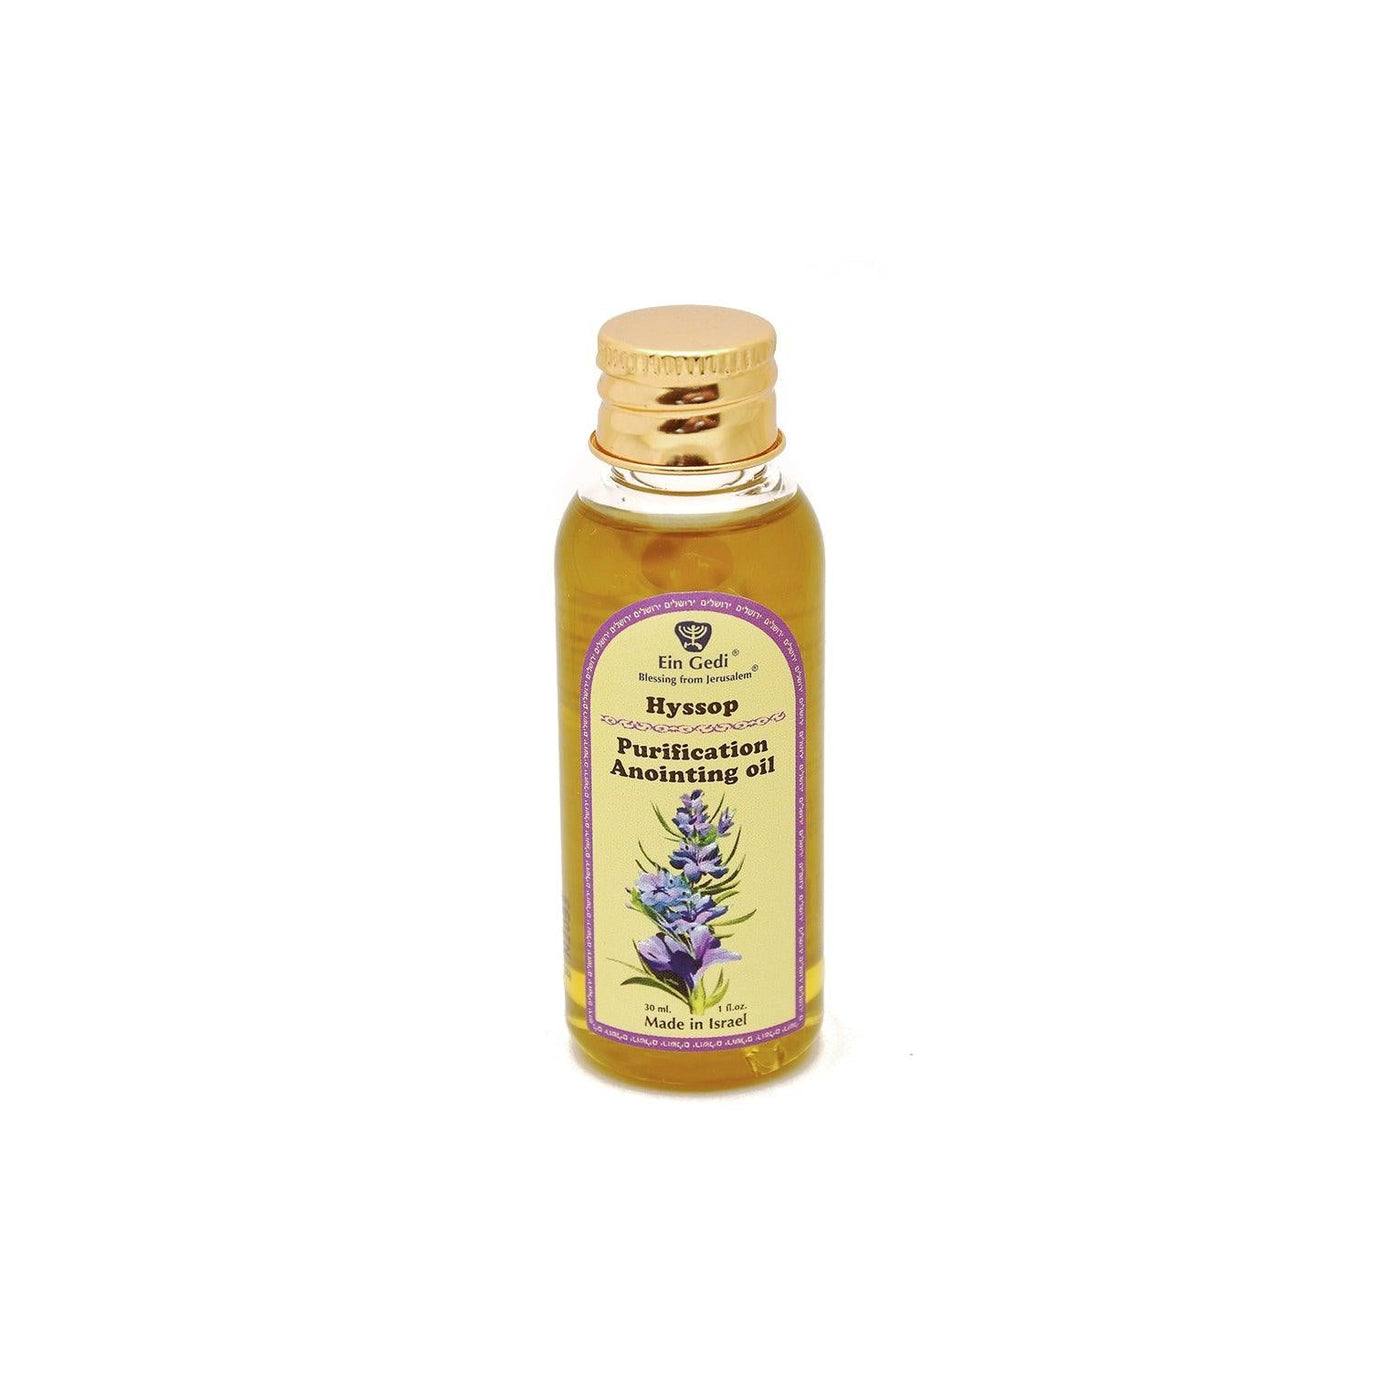 Hyssop Purification Anointing Oil 30 ml Ein Gedi - Spring Nahal